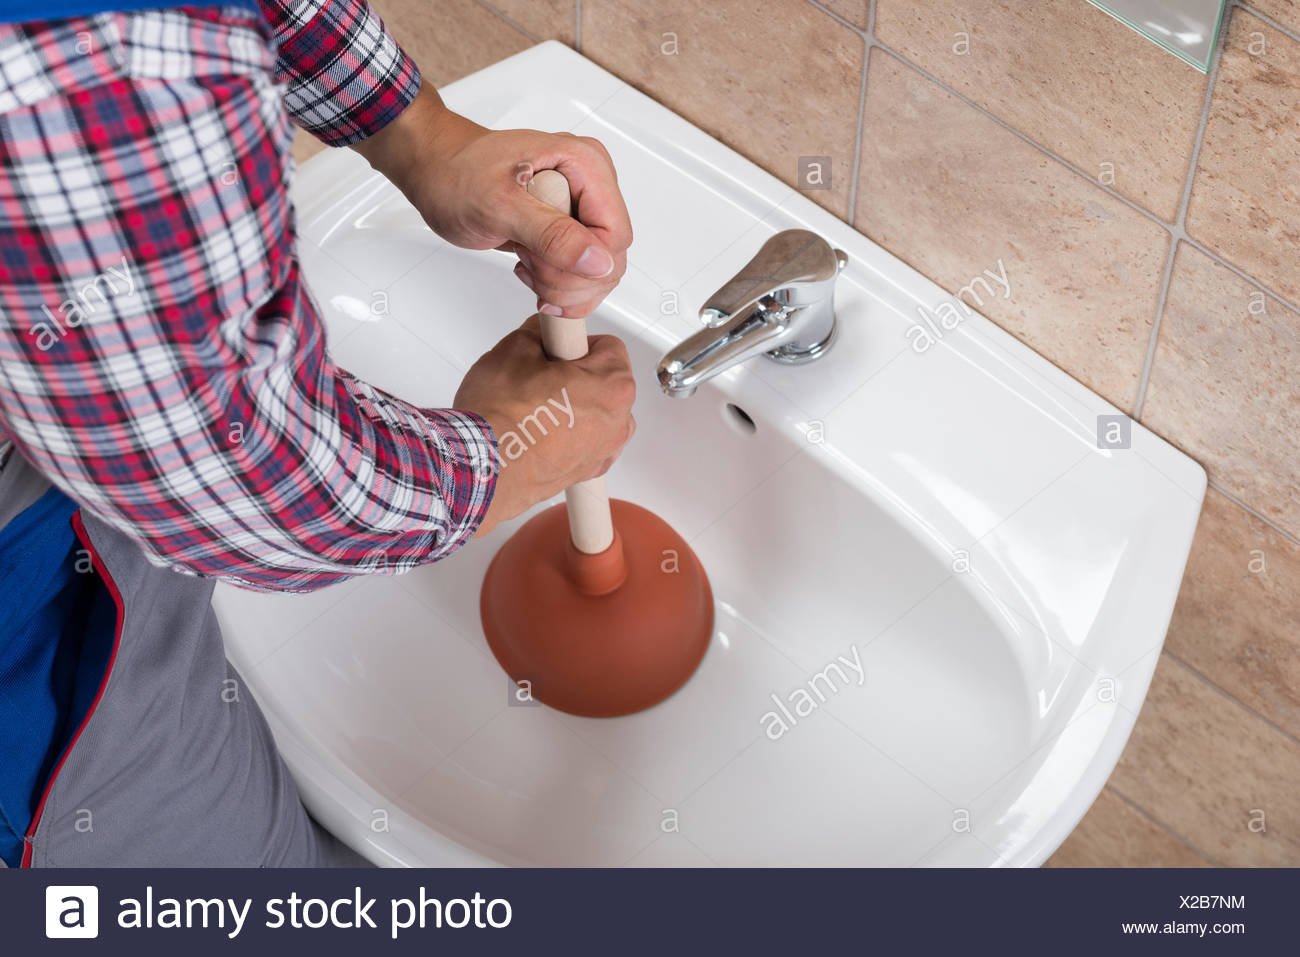 Plumber Using Plunger In Bathroom Sink Stock Photo Alamy